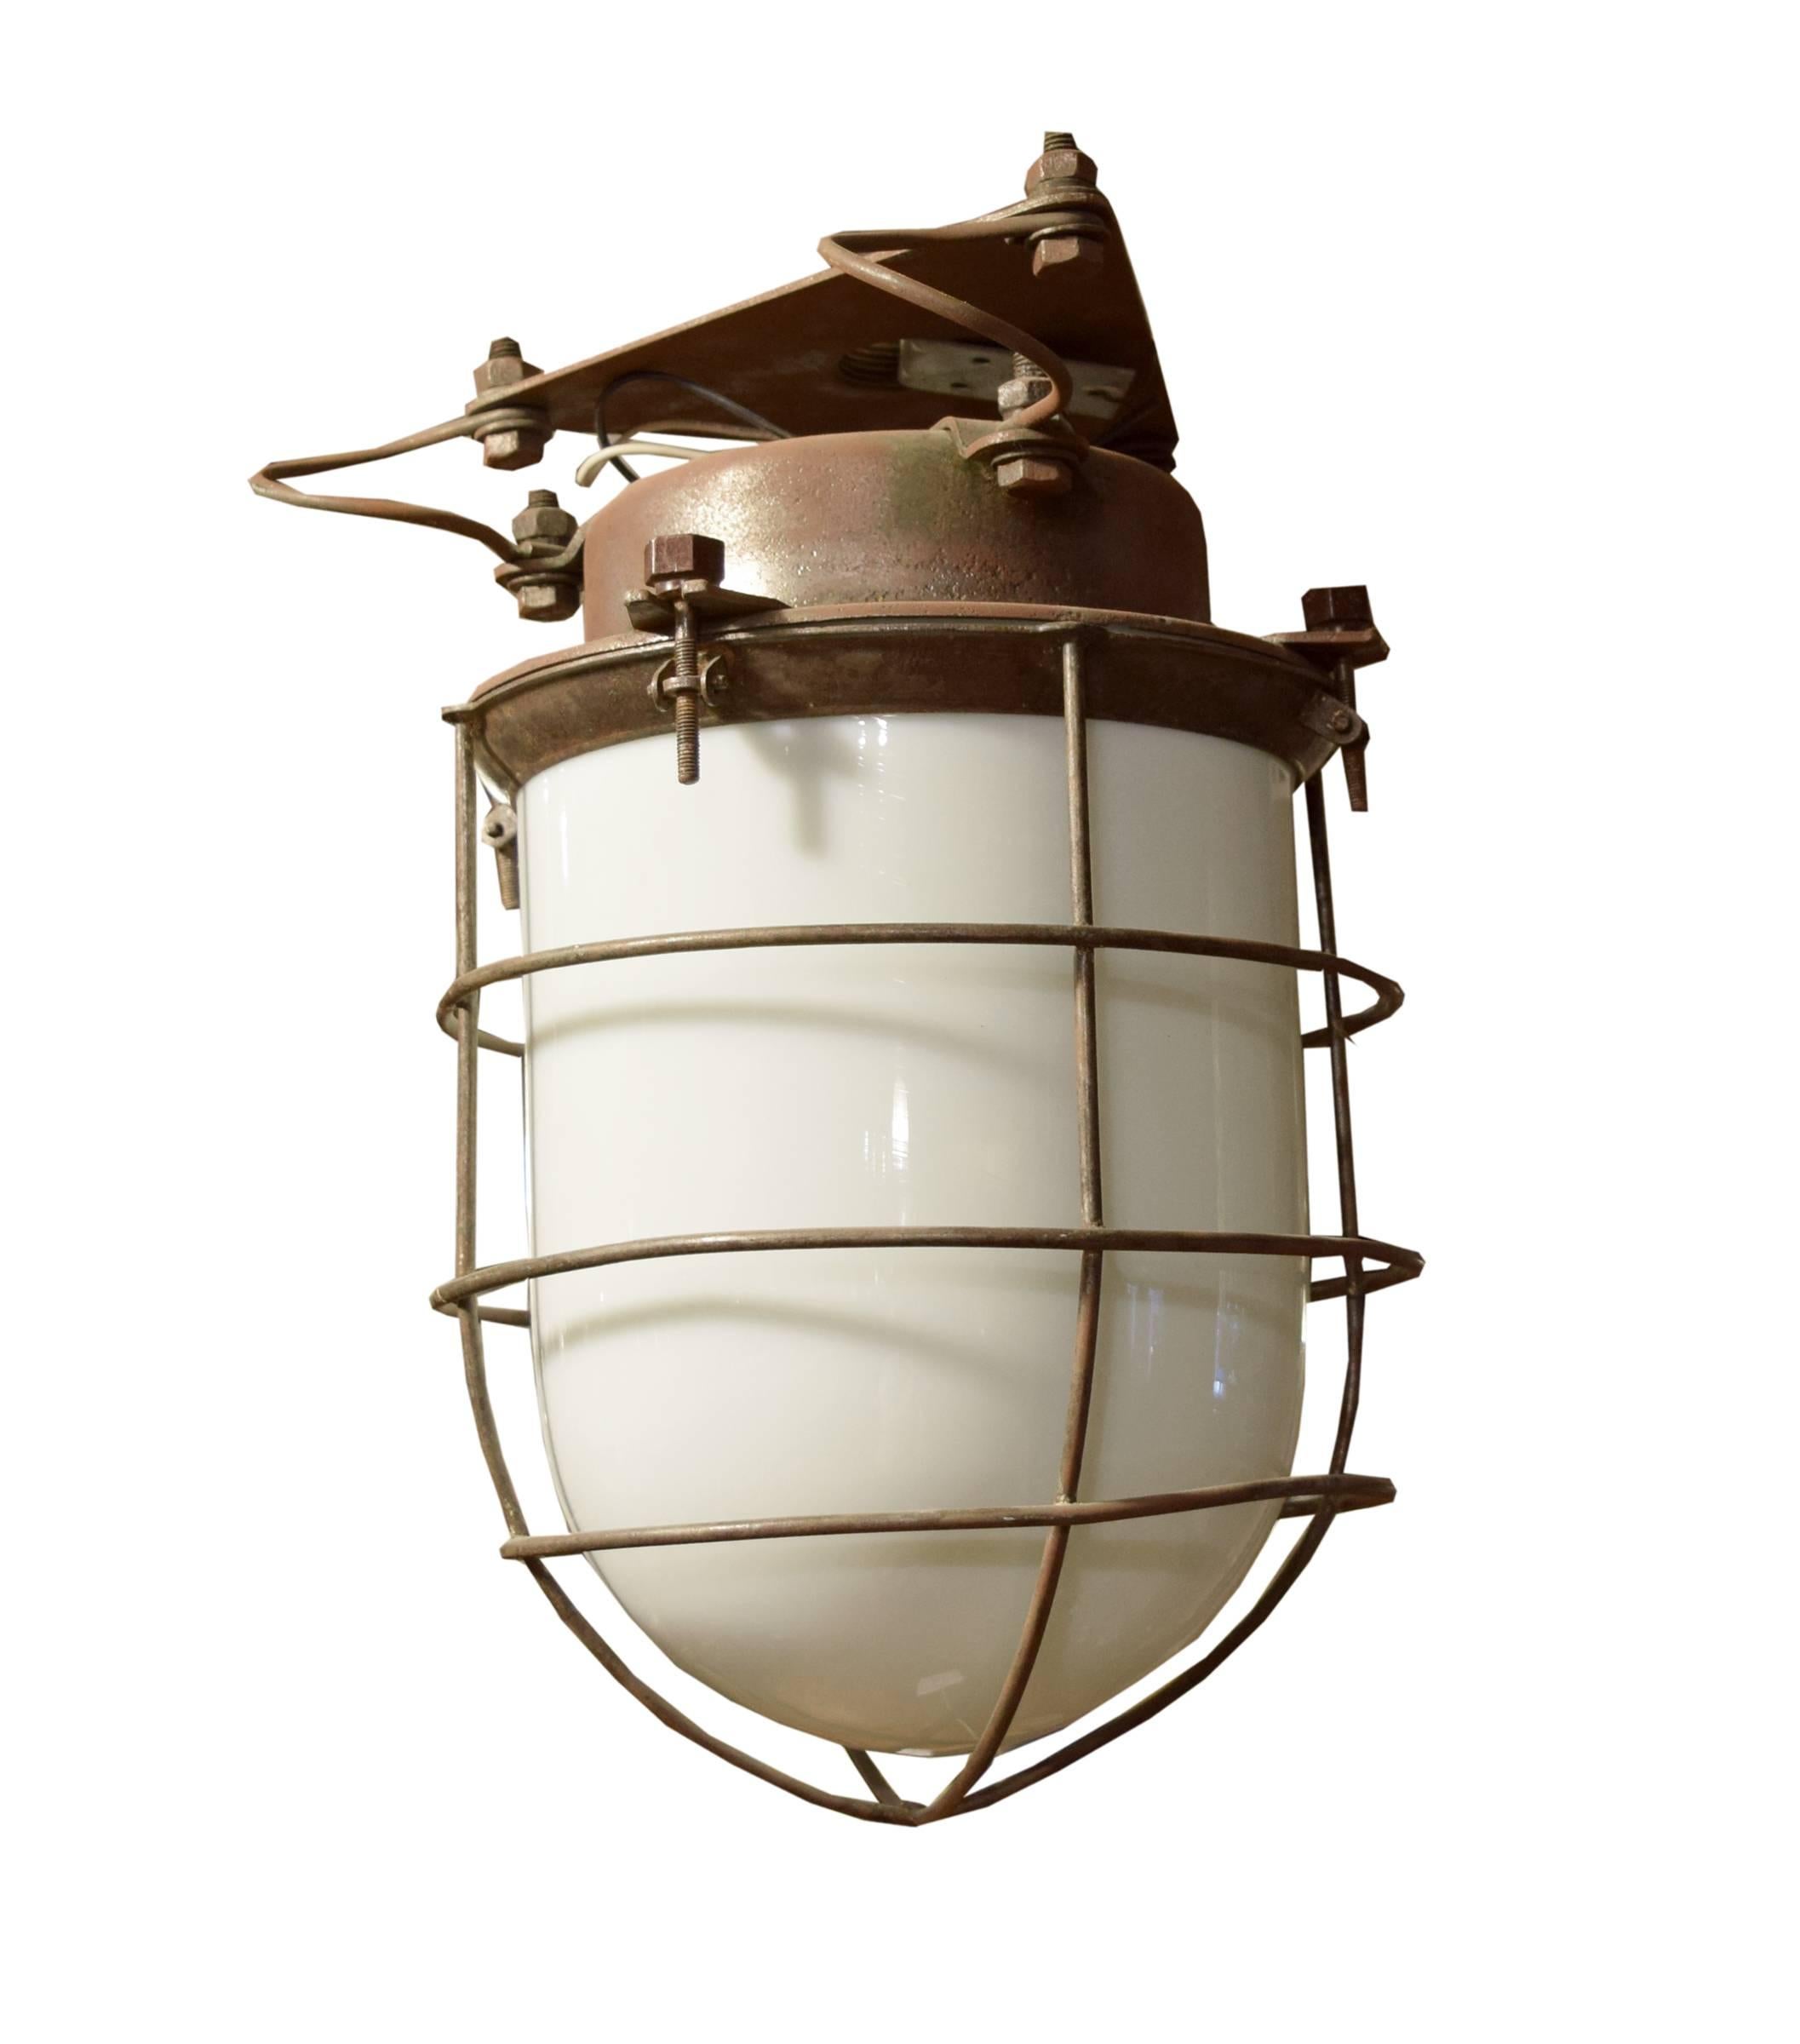 A fantastic Argentine explosion proof light fixture with an iron body and cage on spring mount with opaque glass shade. c. 1940's. Three available.